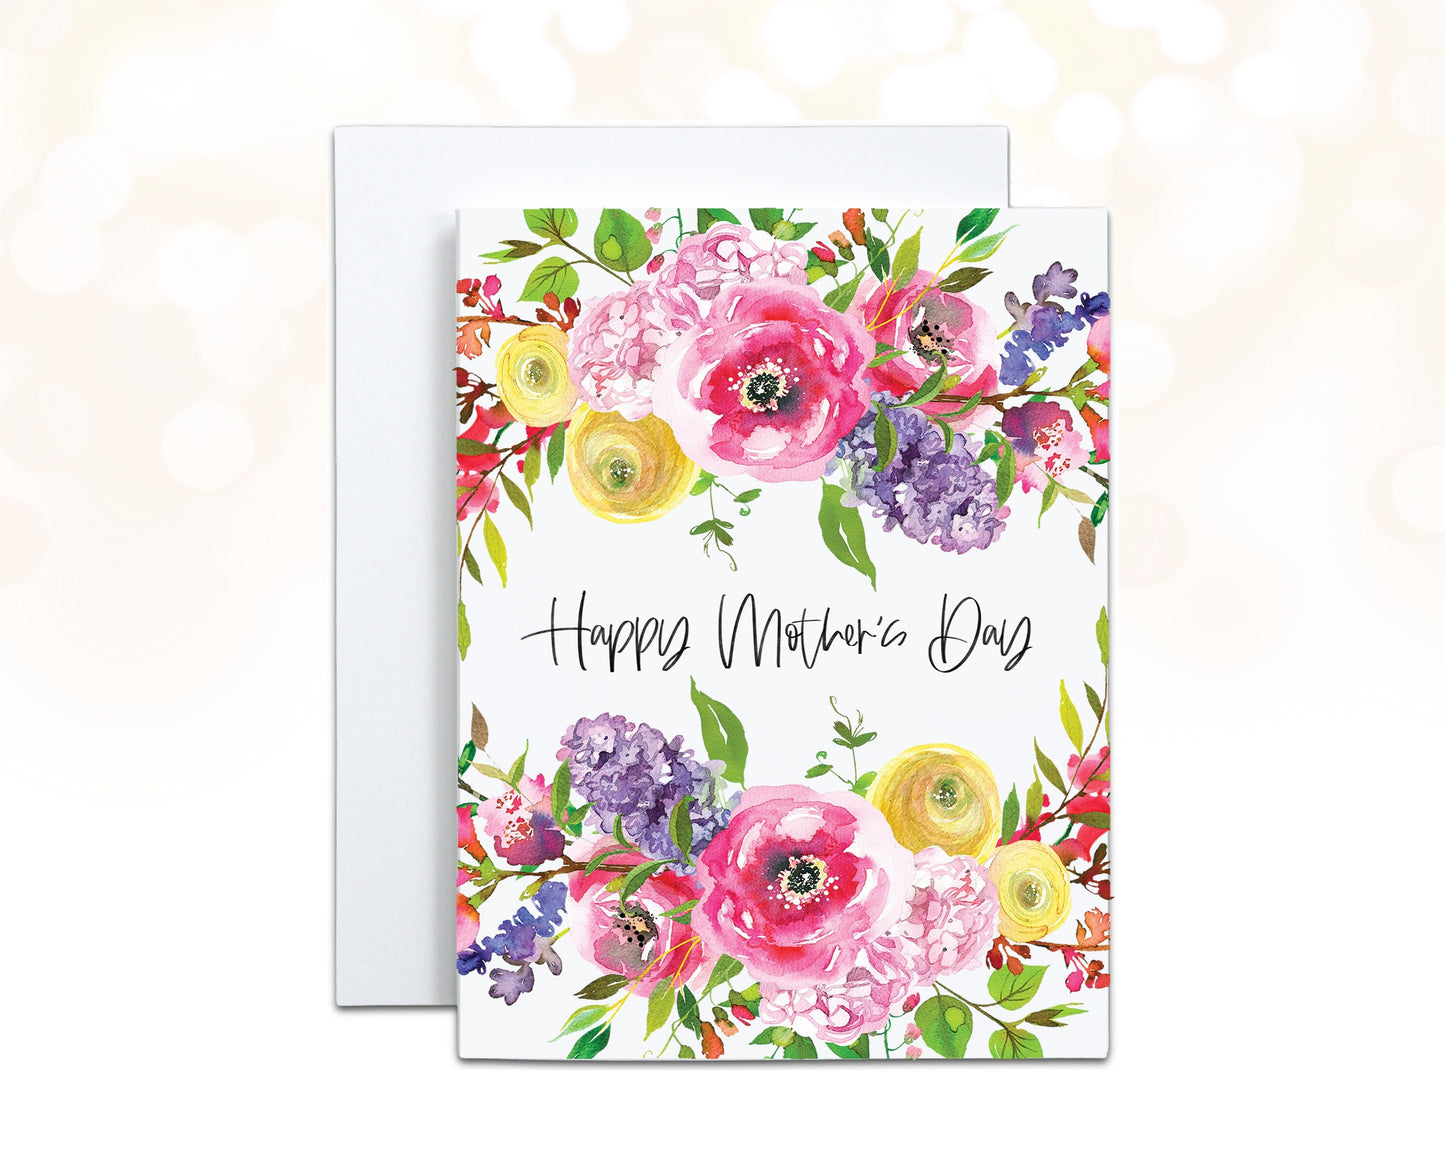 Spring Bouquet Happy Mother’s Day Card, Botanical Flower Garden Card for Mom, Floral Watercolor Illustrated Art A2 Card